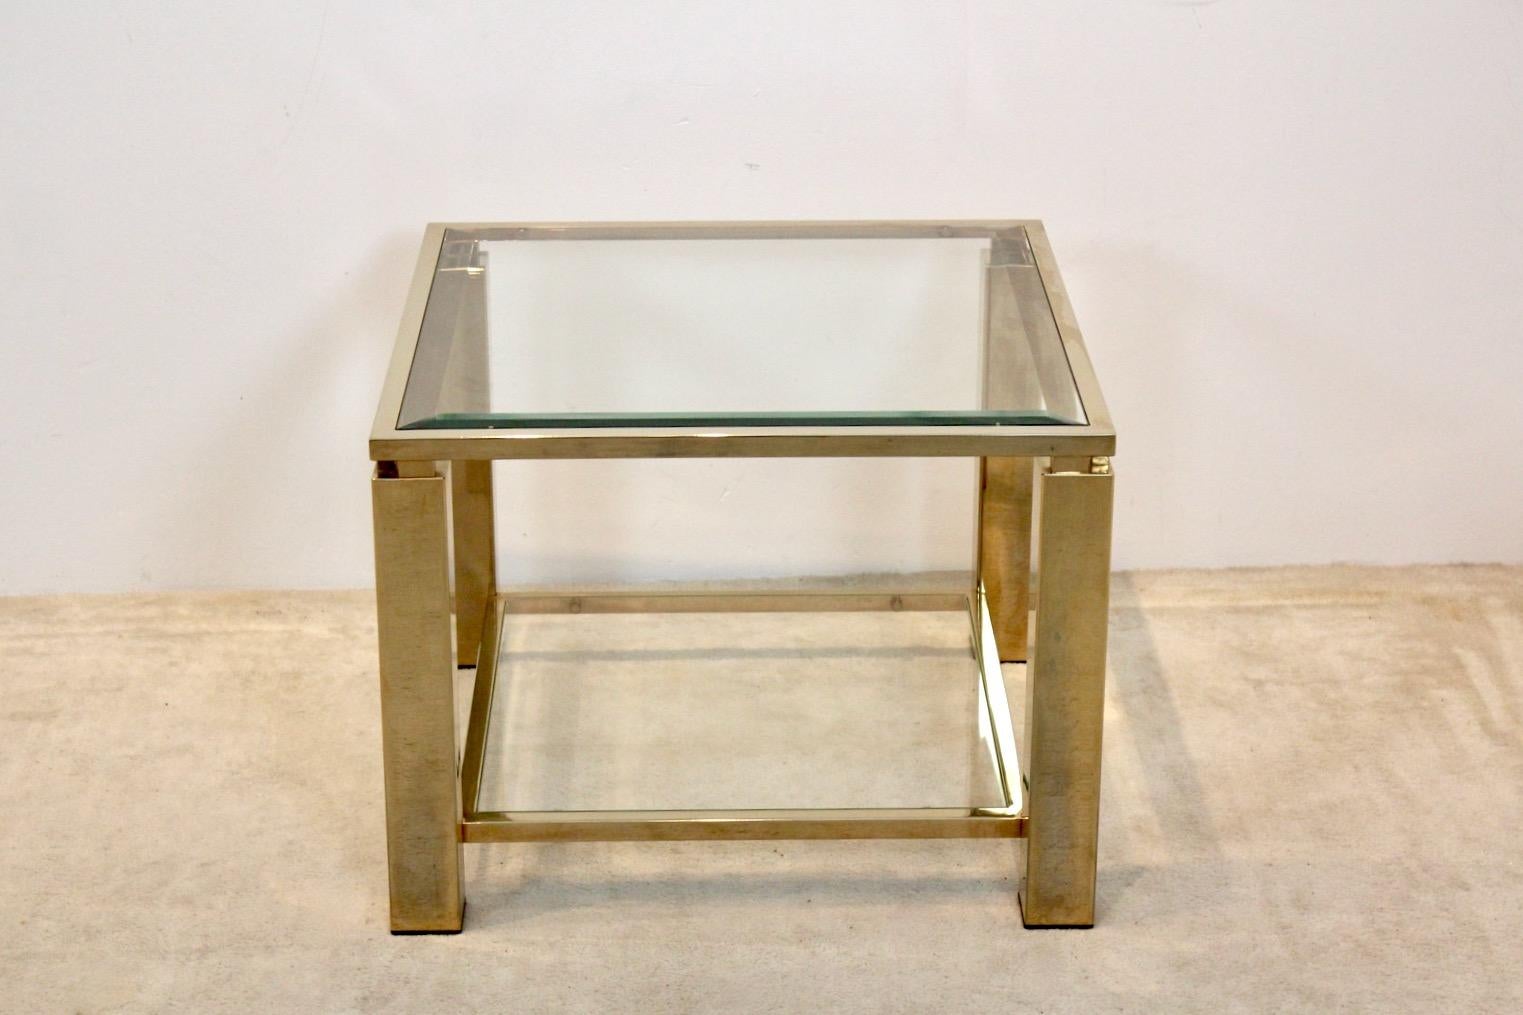 Stunning square 23ct Gold-plated Belgochrom side table. The heavy frame is gold-plated and features two tiers of Glass. Both tier shelfs come with clear glass. The table is a unique example of the Hollywood Regency style and in very good vintage